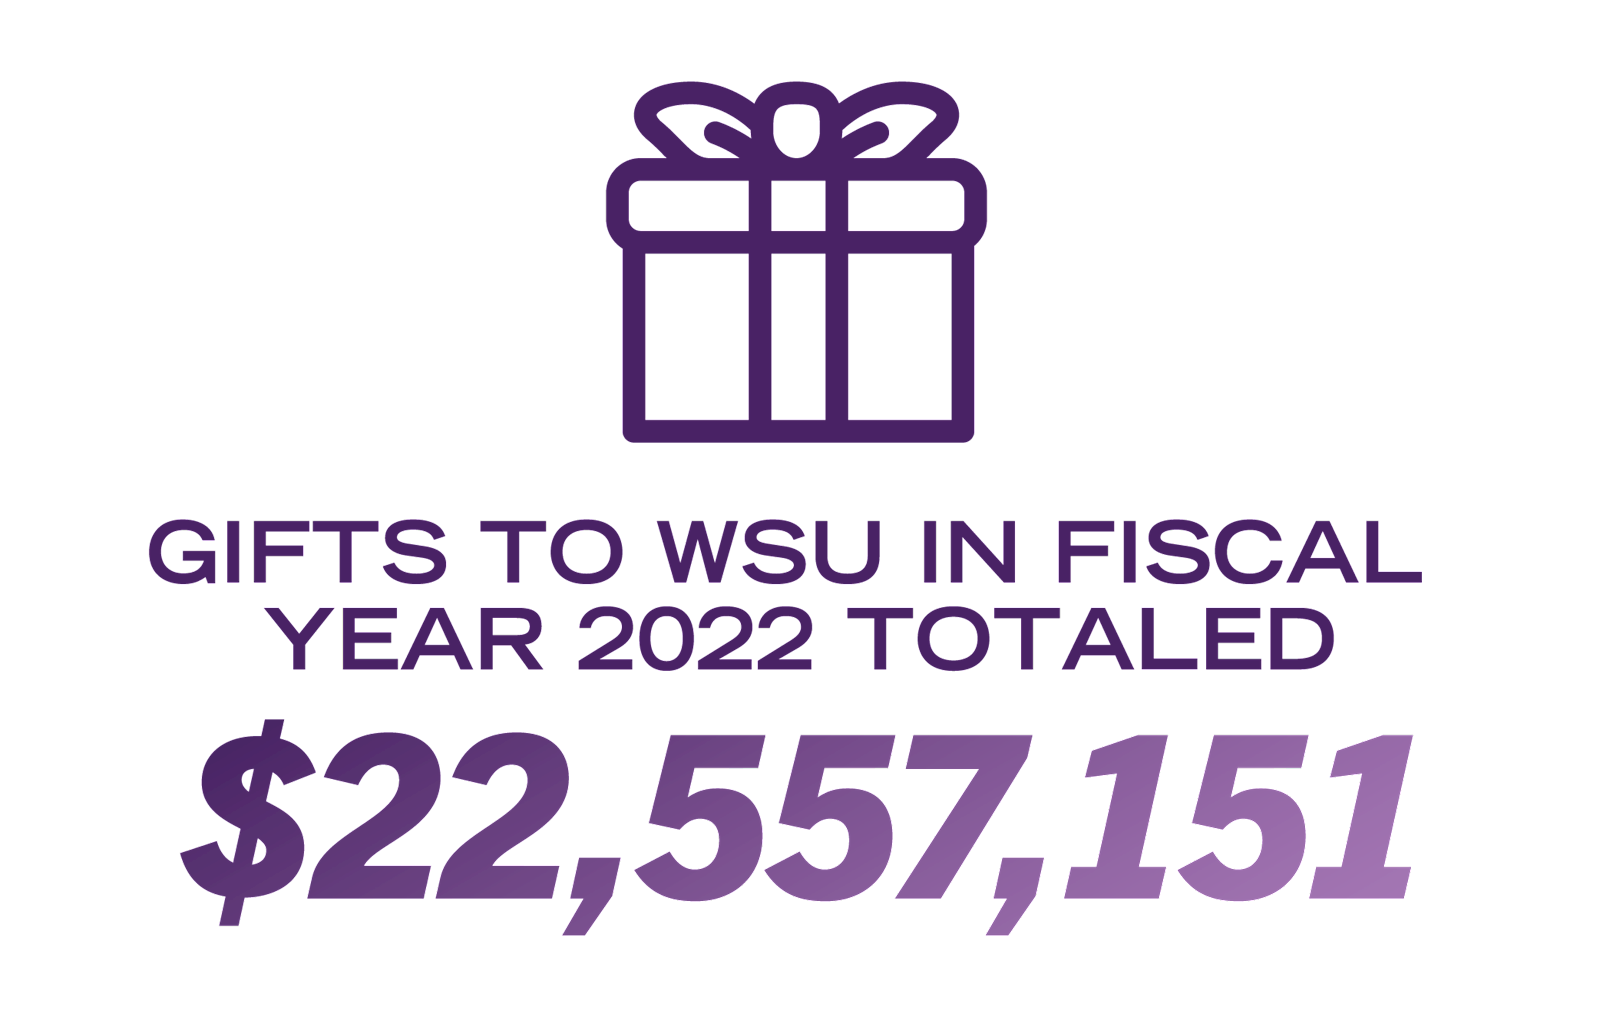 Gifts to WSU in fiscal year 2022 totaled more than $22 million.